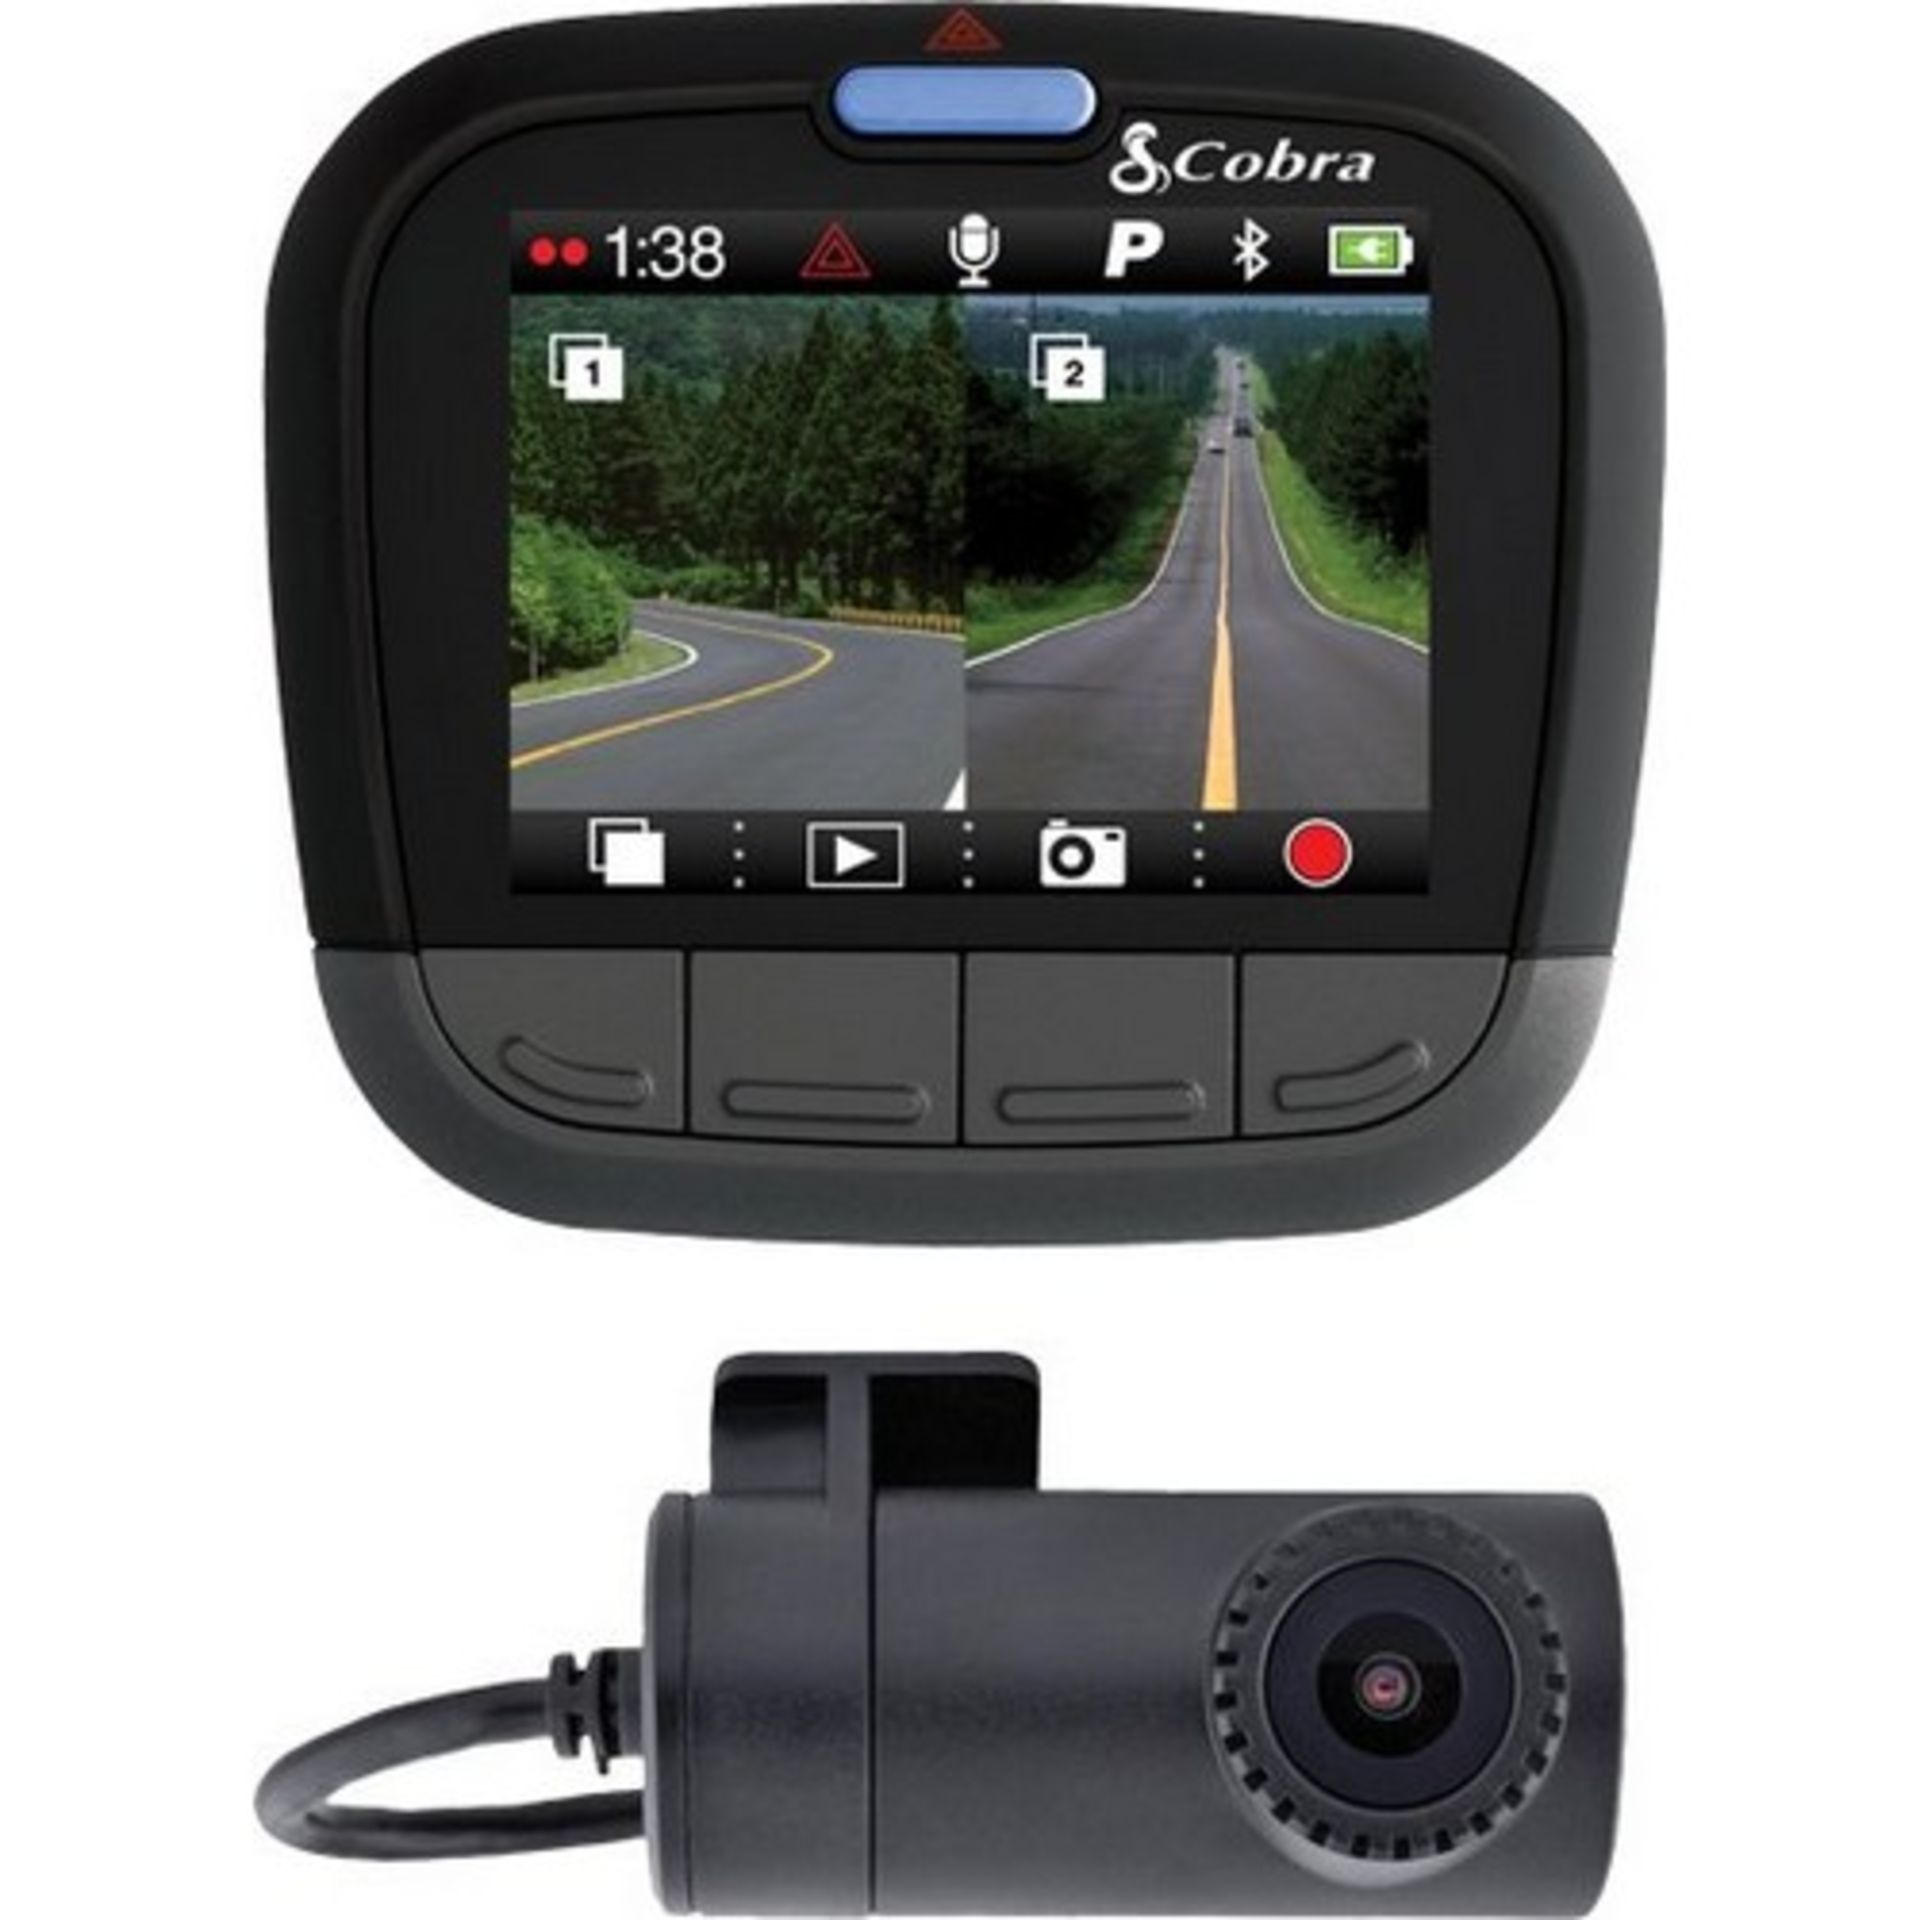 V Grade A Cobra CDR905DBT Dual View Dash Cam With 1080p Front and 720p Rear Camera With 16gb - Image 2 of 2